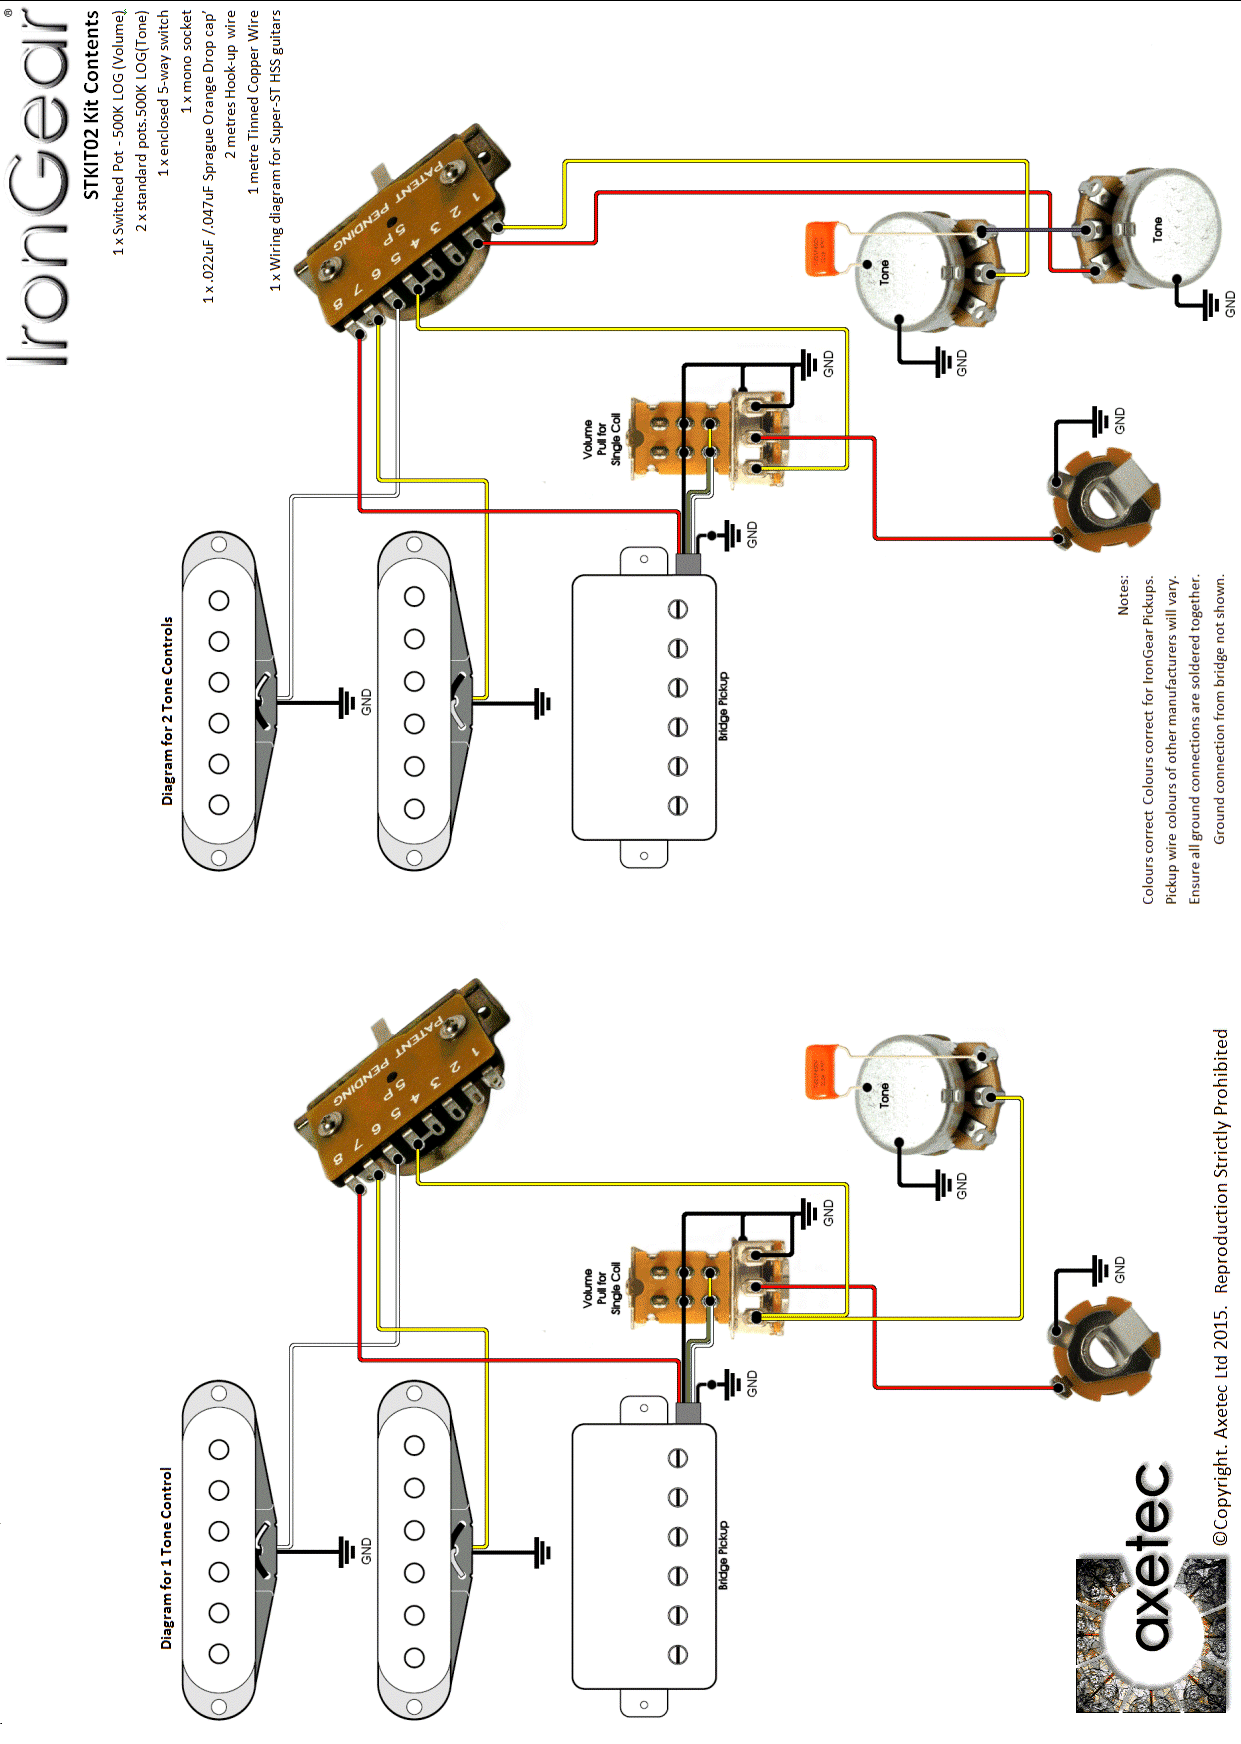 Strat Hss Wiring Diagram from www.axetec.co.uk